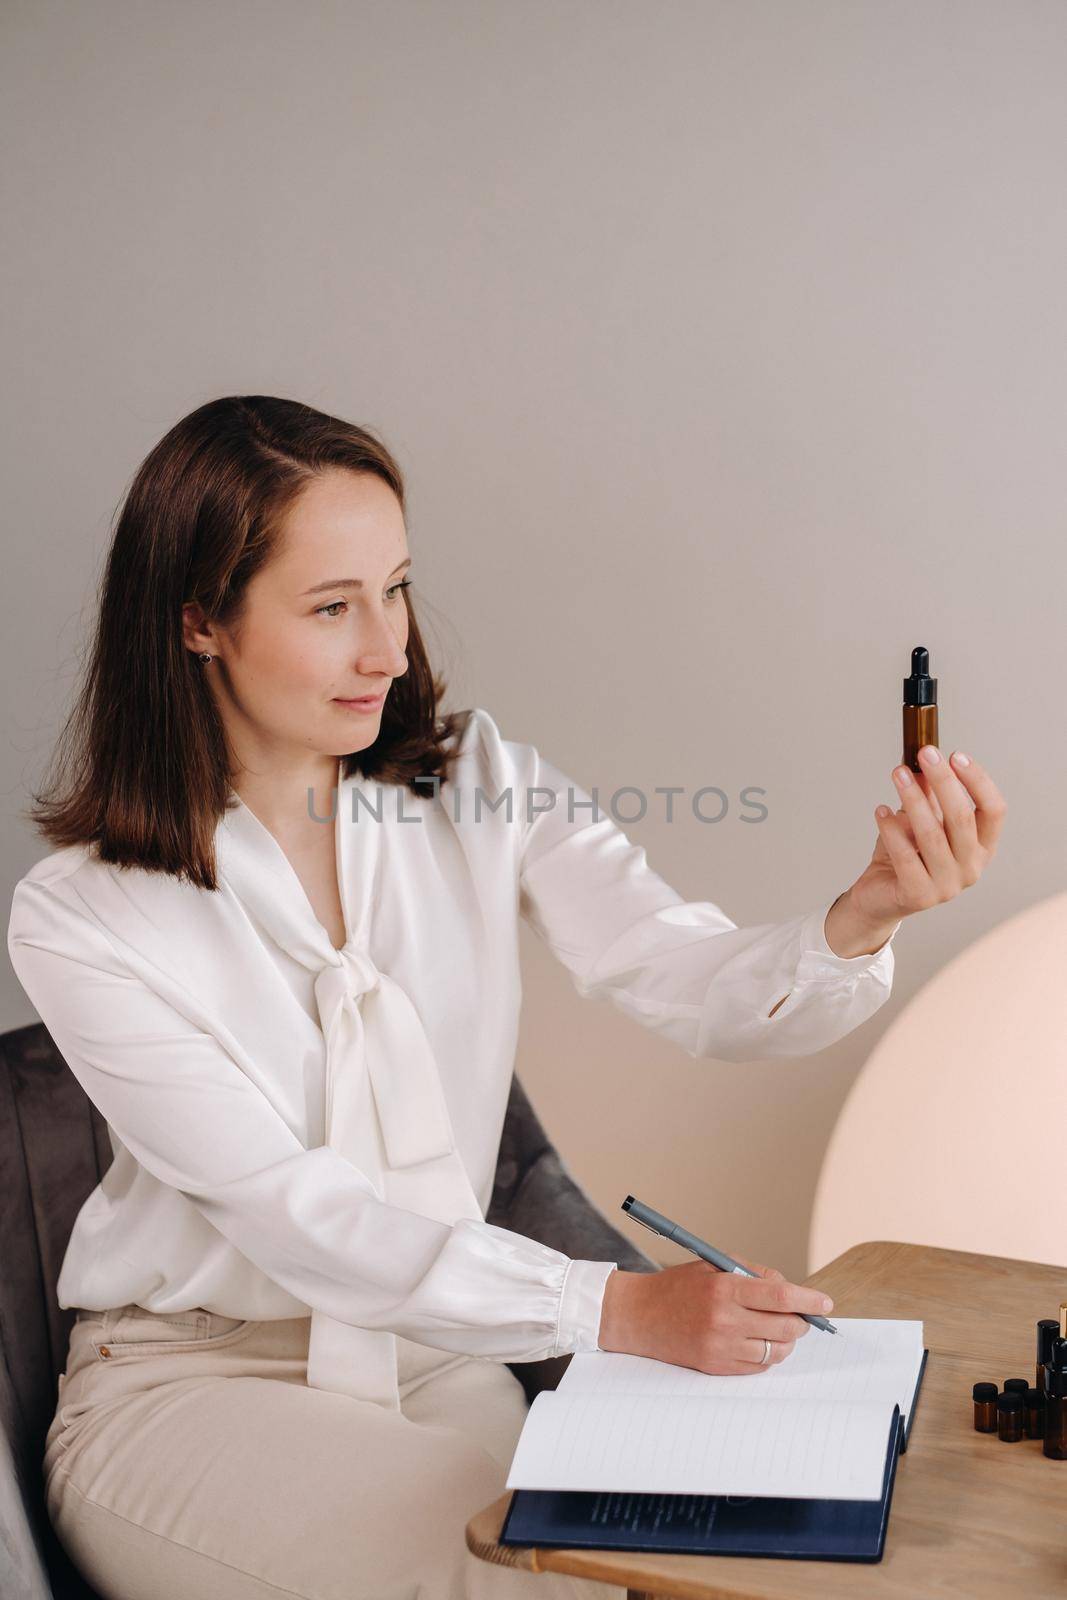 The aromatherapist girl is sitting in her office and holding a bottle of aromatic oil in her hands and writing something down. there are essential oils on the table.